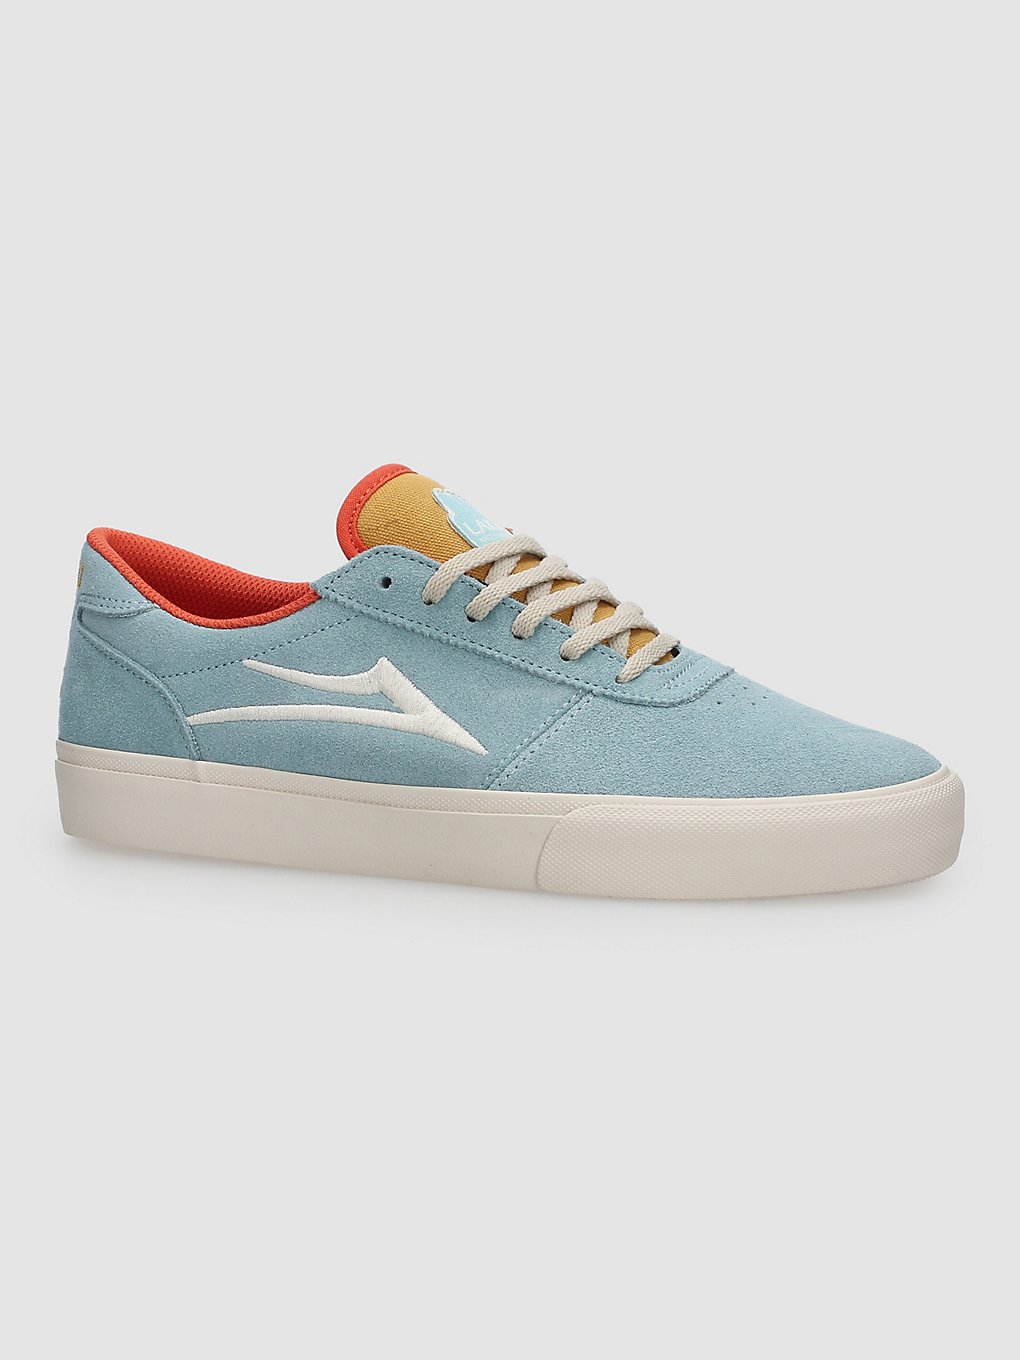 Lakai Manchester Skate Shoes people suede kaufen